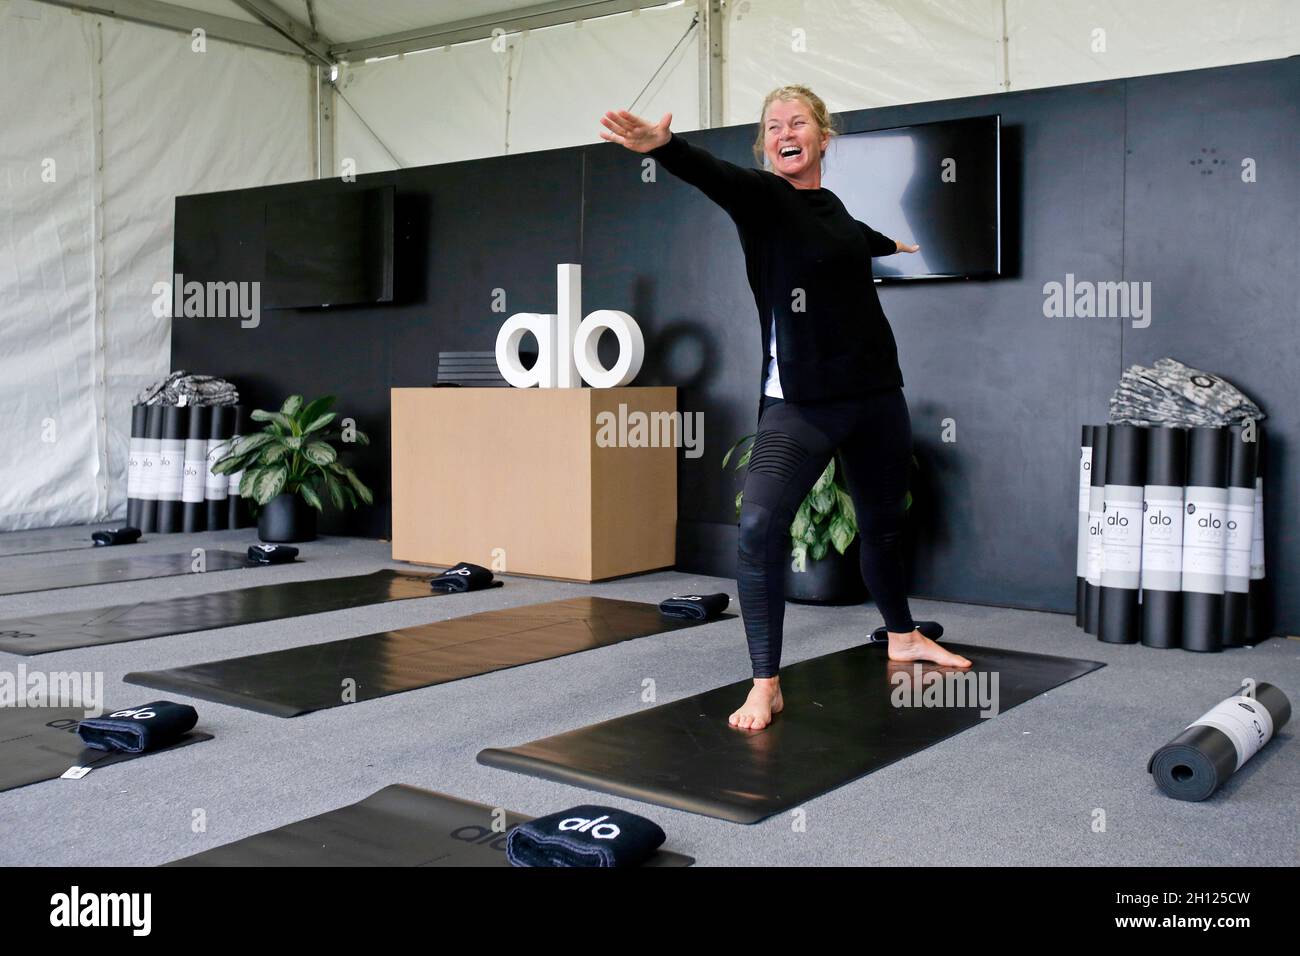 Fair Hill, MD, USA. 15th Oct, 2021. October 15, 2021: Jonelle Price holds a pose while being shown around the Alo Yoga booth during the Maryland Five-Star at the Fair Hill Special Event Zone in Fair Hill, Maryland on October 15, 2021. Jon Durr/Eclipse Sportswire/CSM/Alamy Live News Stock Photo